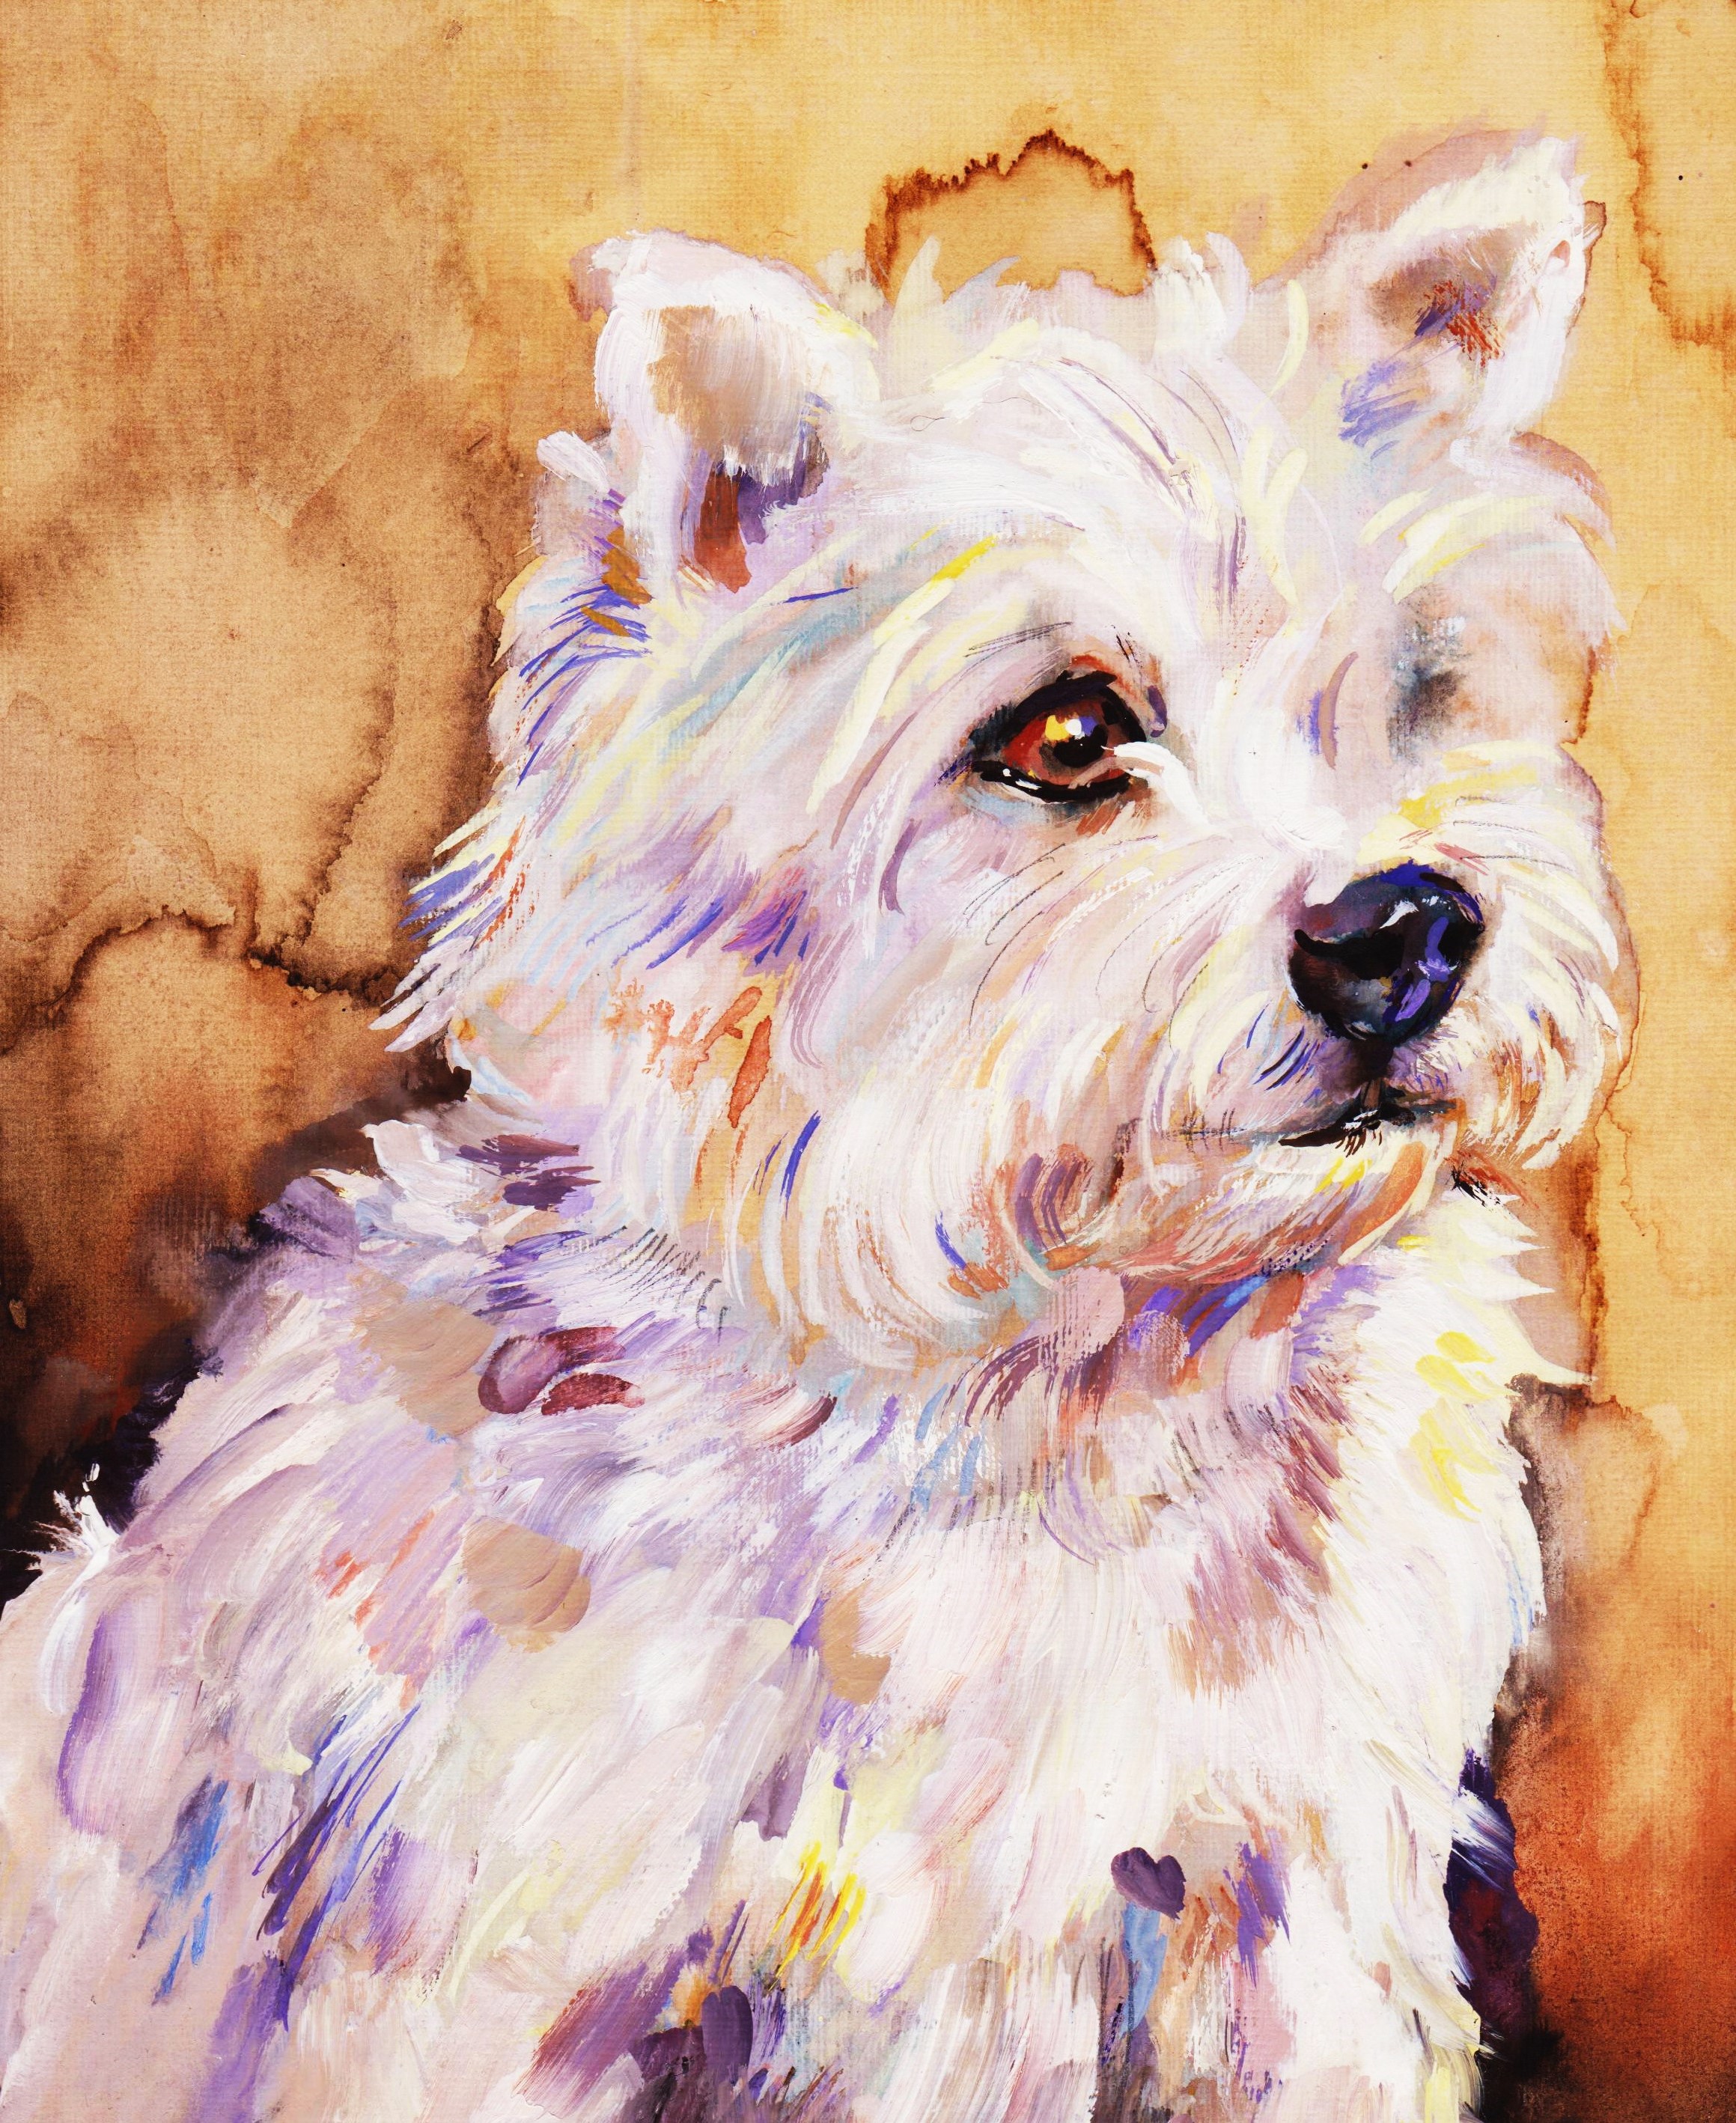 WEST HIGHLAND WHITE TERRIER - PIGFISH - KITTY PIGFISH - CARICATURIST - CARTOONIST - LIVE AT EVENTS